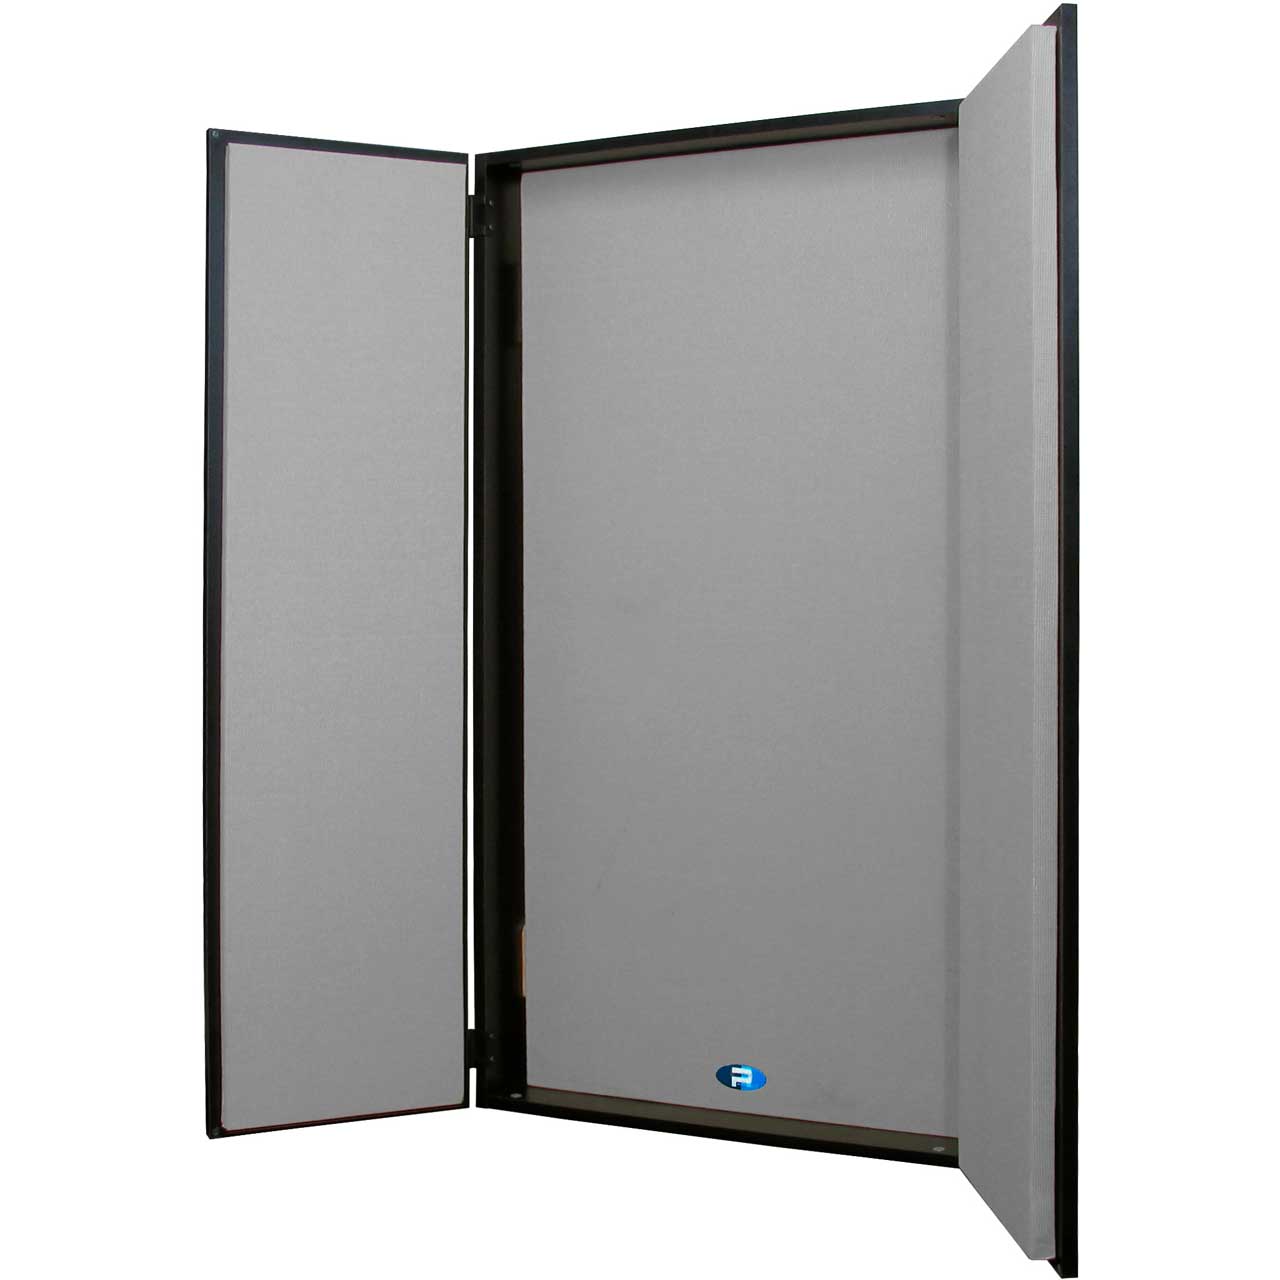 Primacoustic FlexiBooth Wall Mount Vocal Booth 